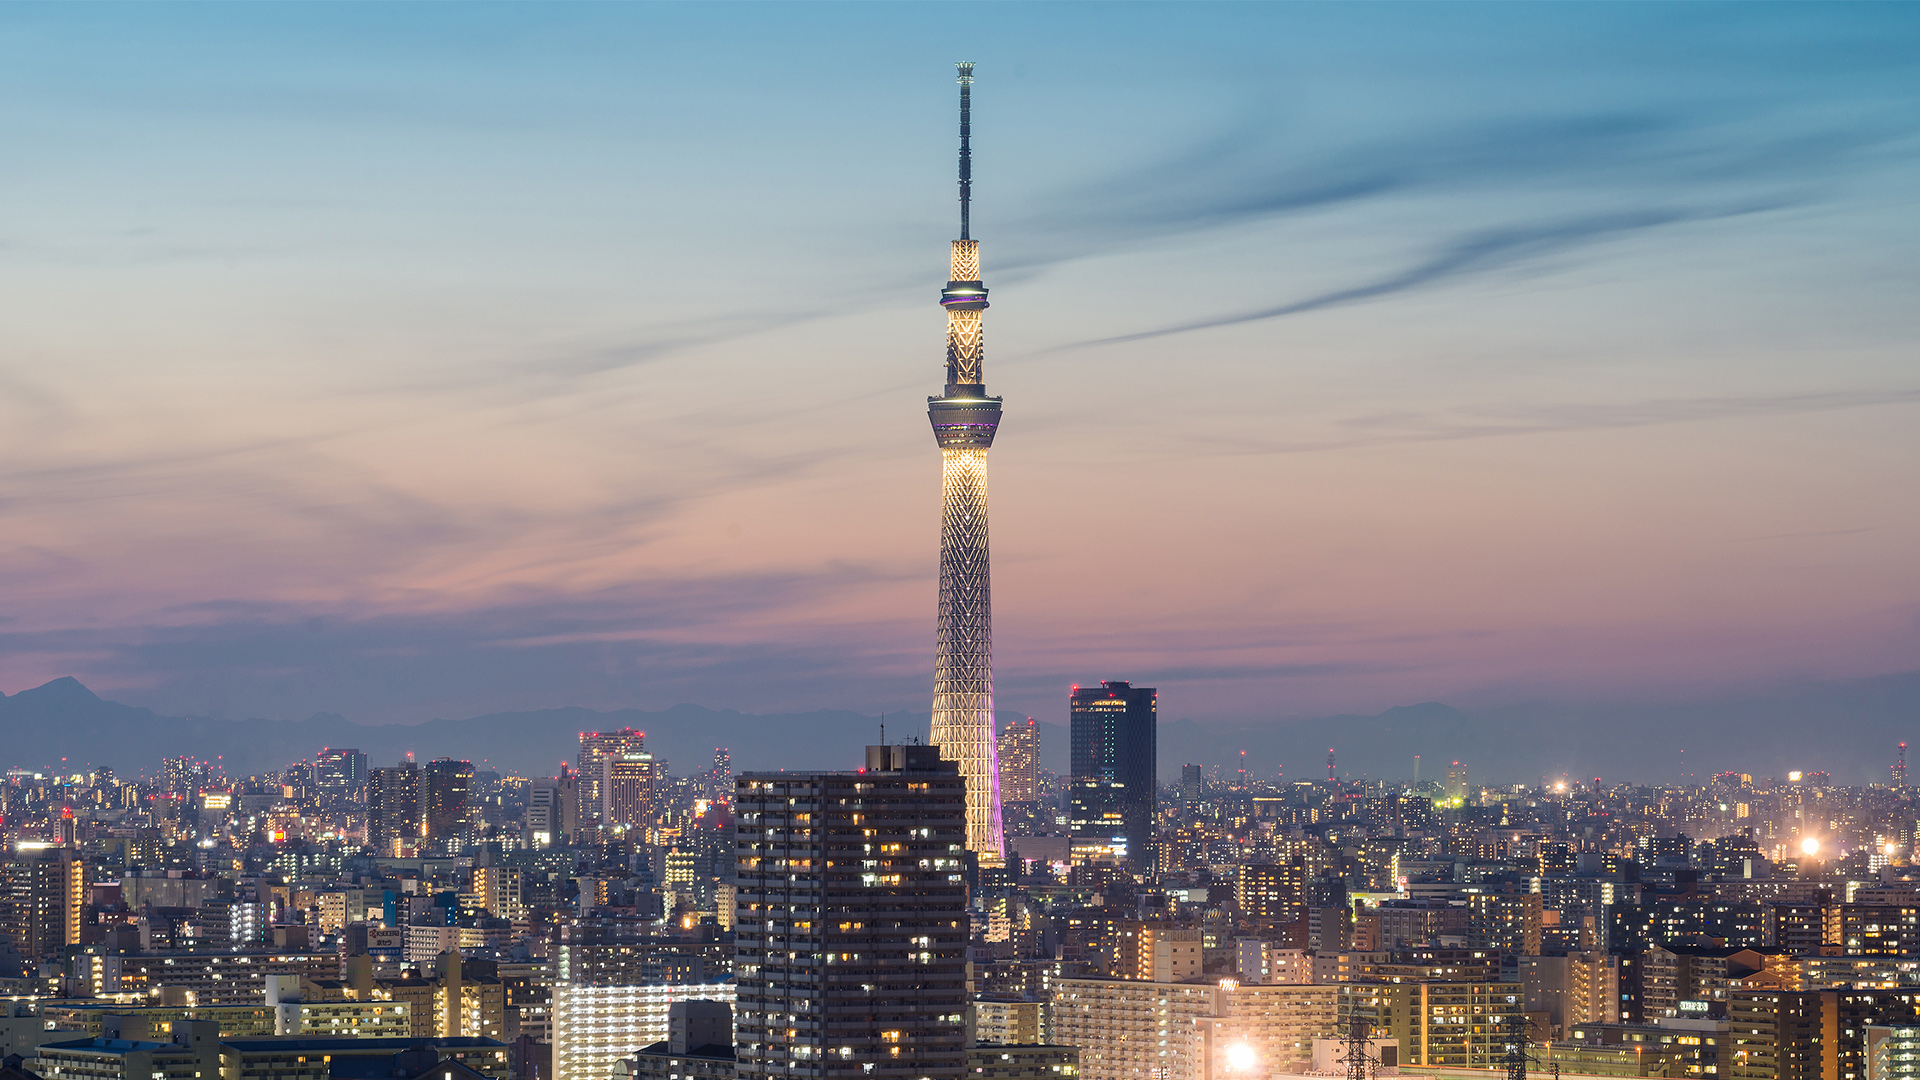 Tokyo Skytree - Tallest Building in the World - Beautiful Global